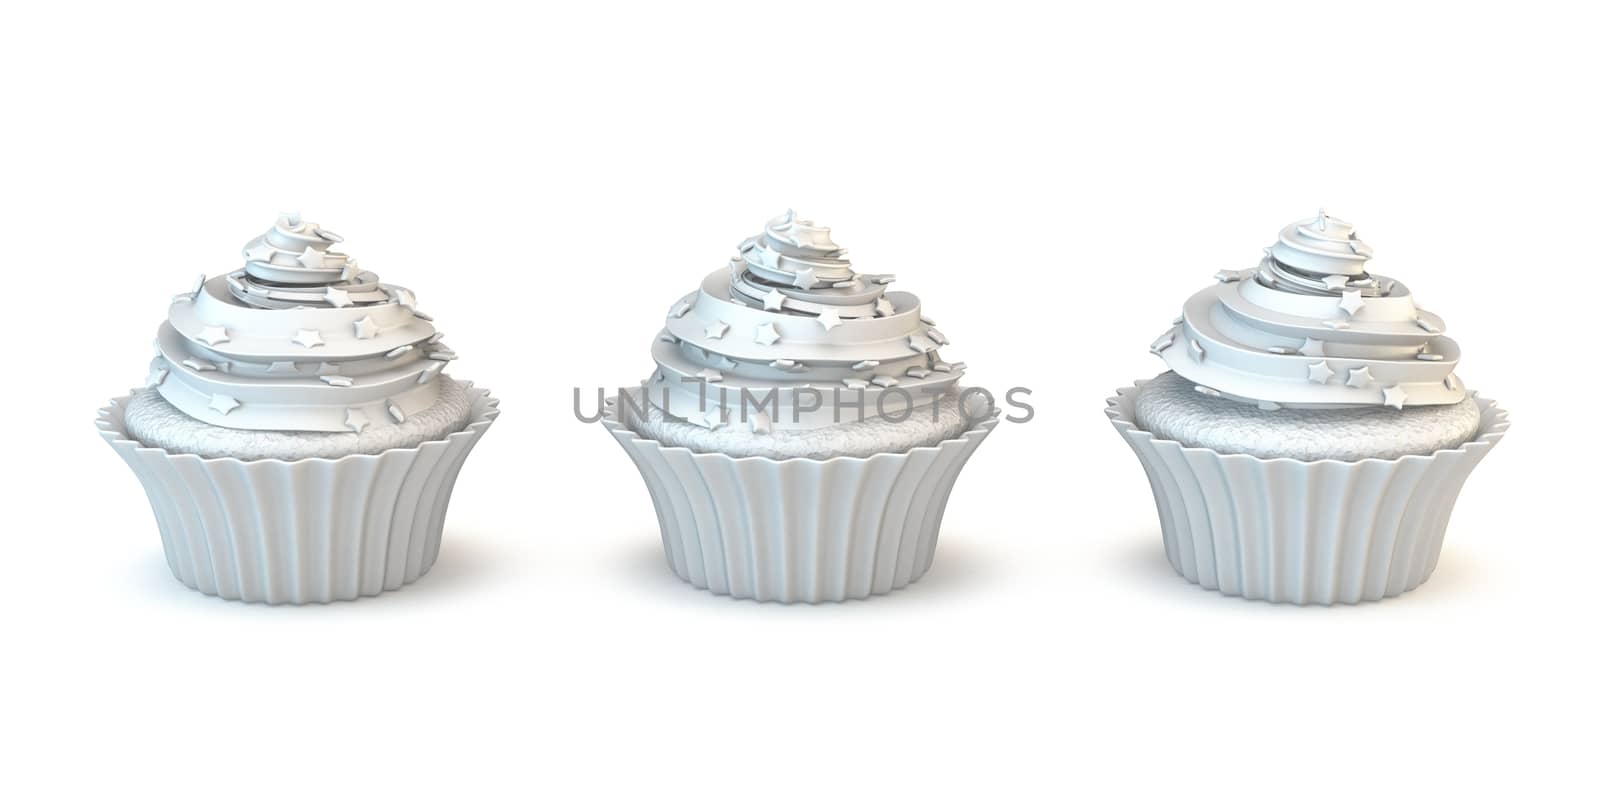 Three white muffin cakes 3D render illustration isolated on white background